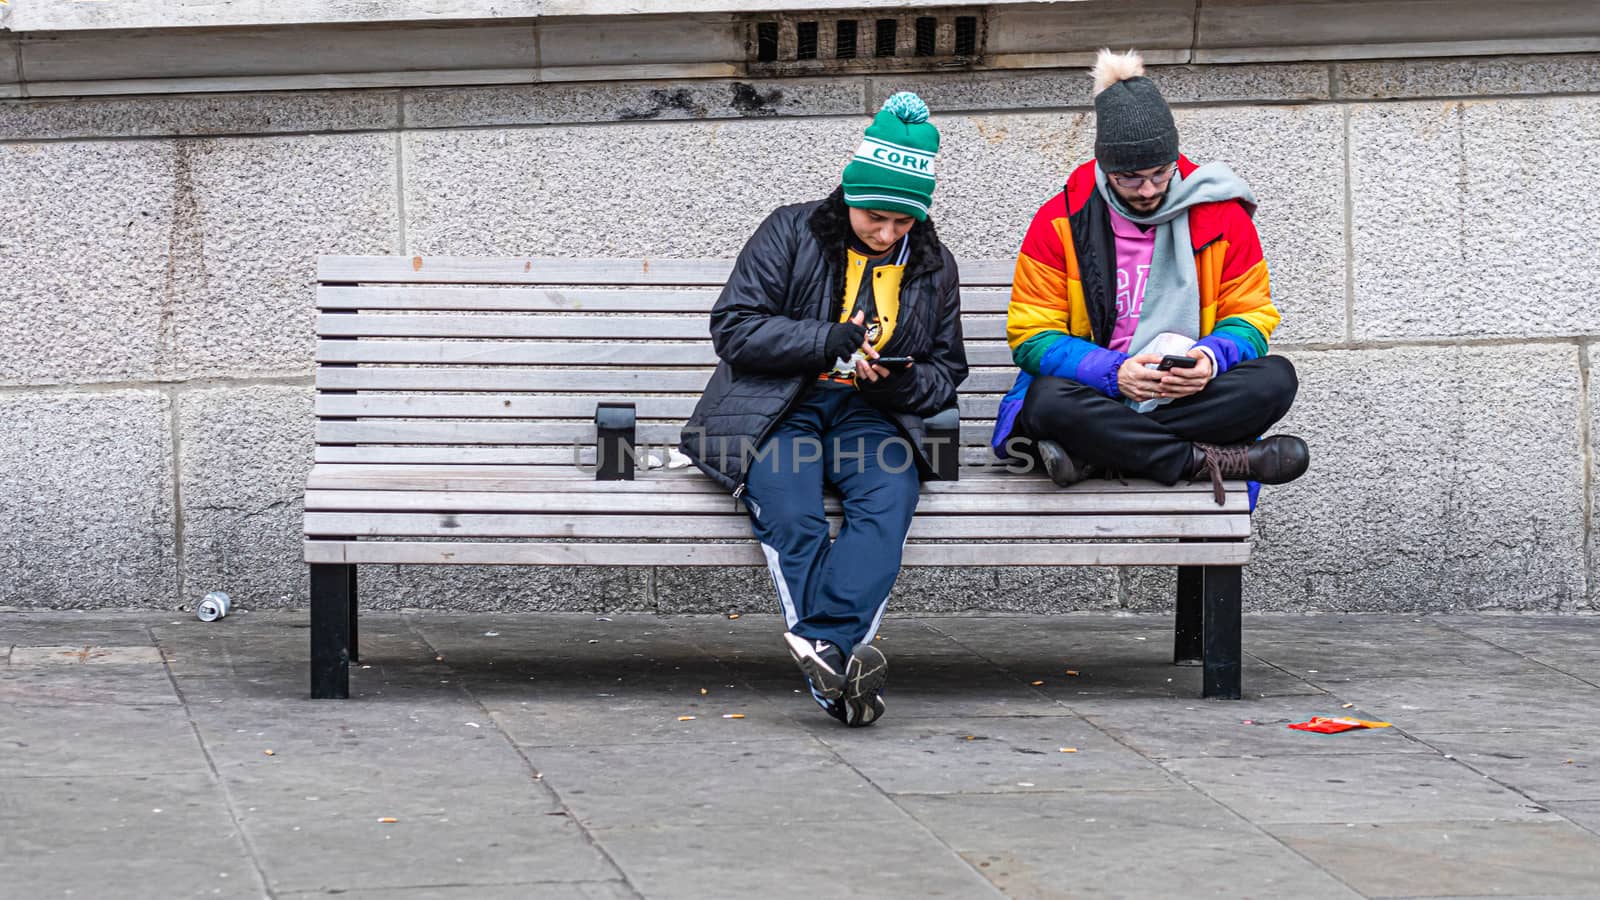 London, UK - January 1, 2020: Two men sit on a bench on the side of the street and look at their smartphones